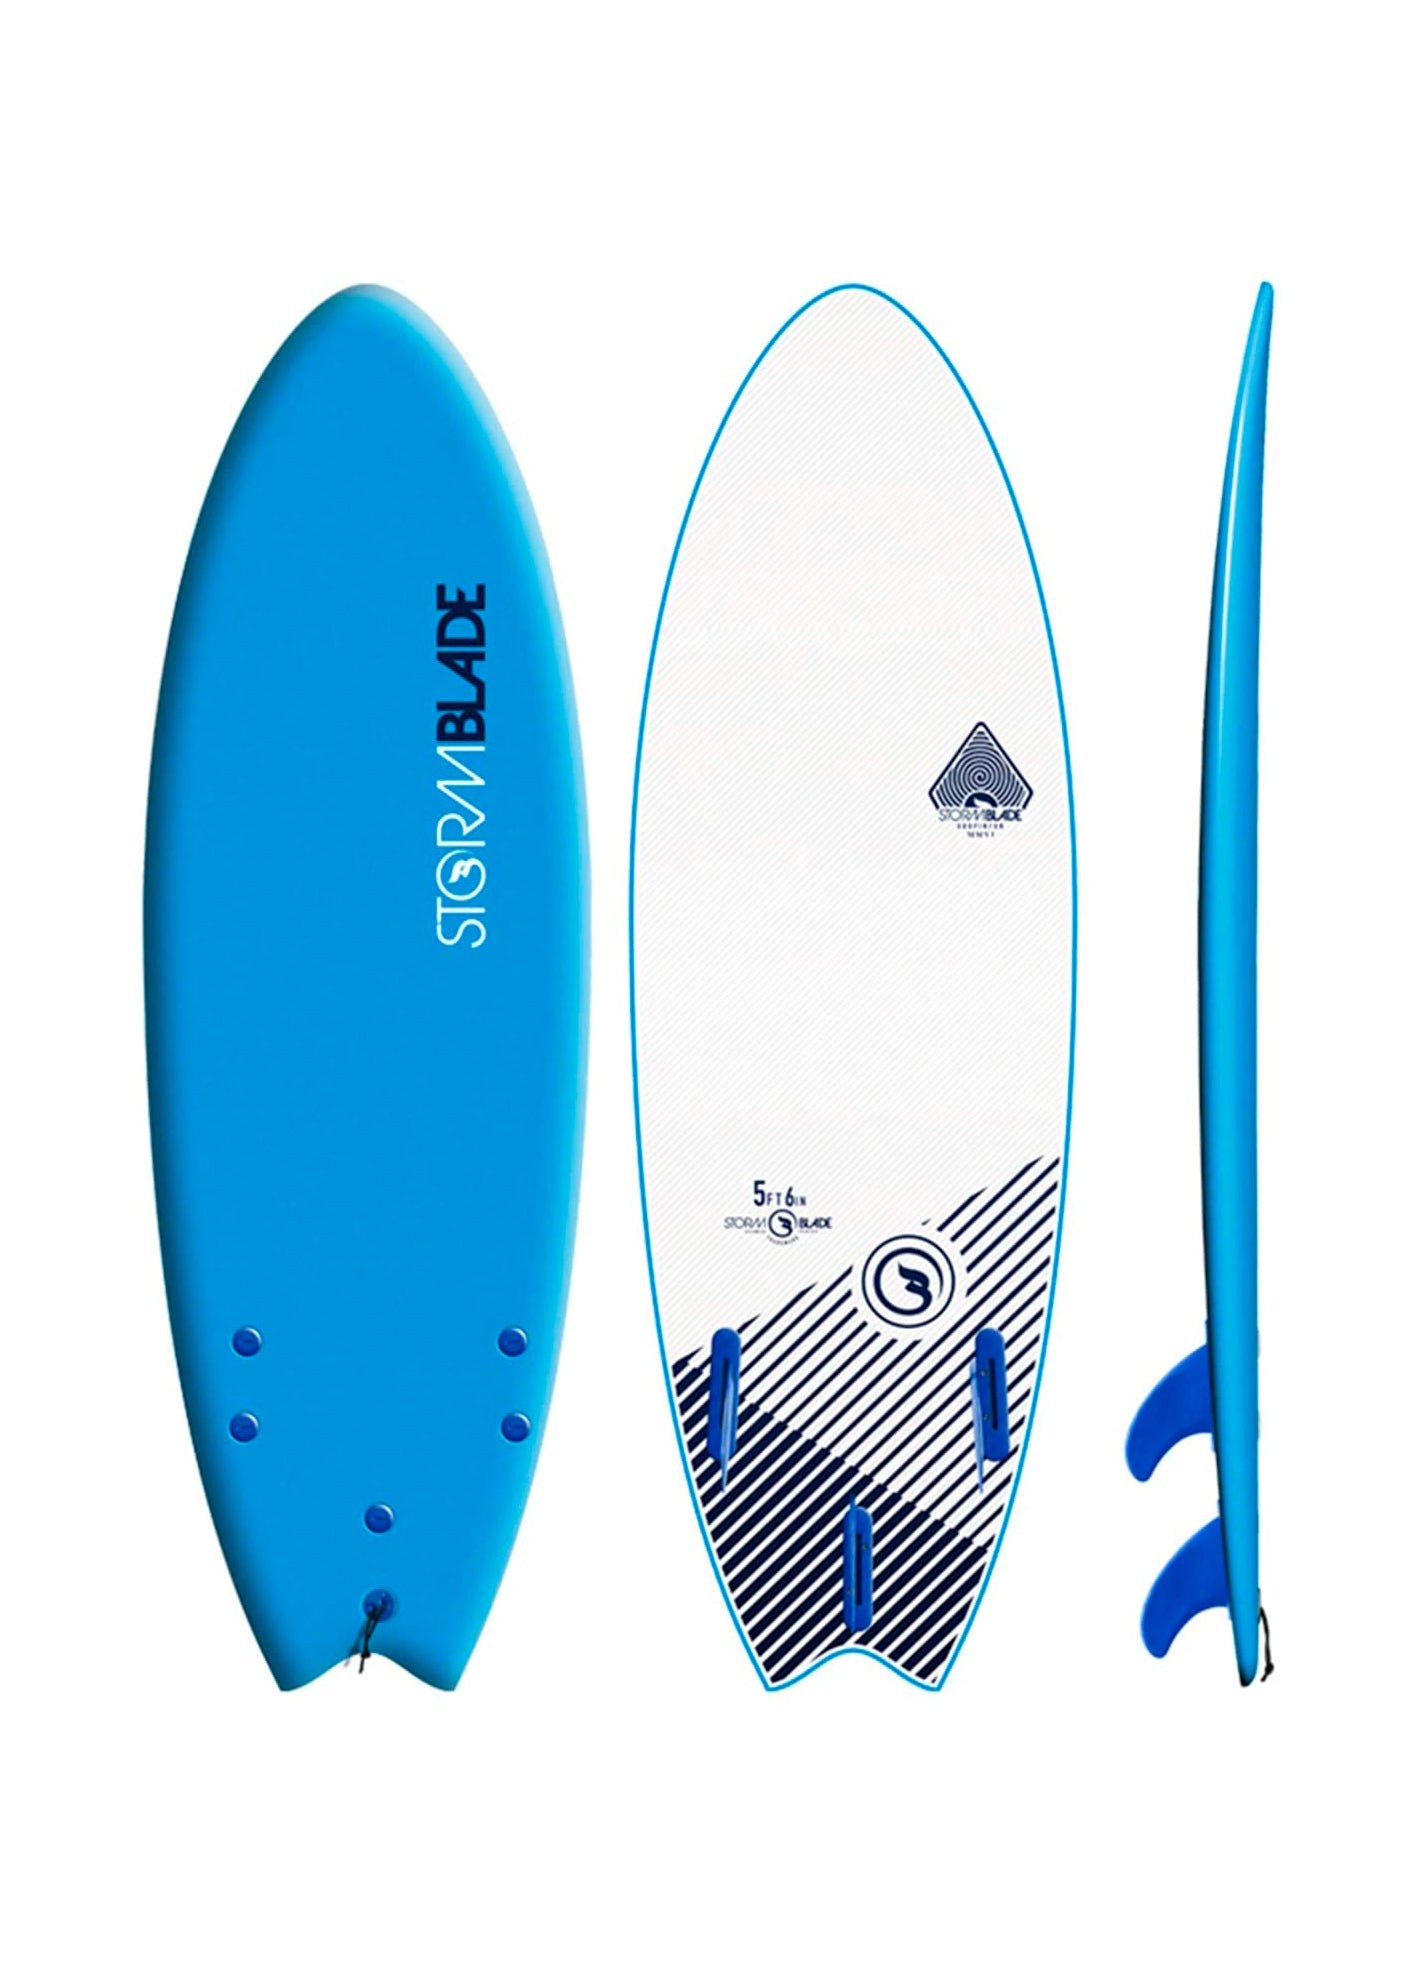 Storm Blade Swallow Tail Surfboard Azure Blue 6ft0in